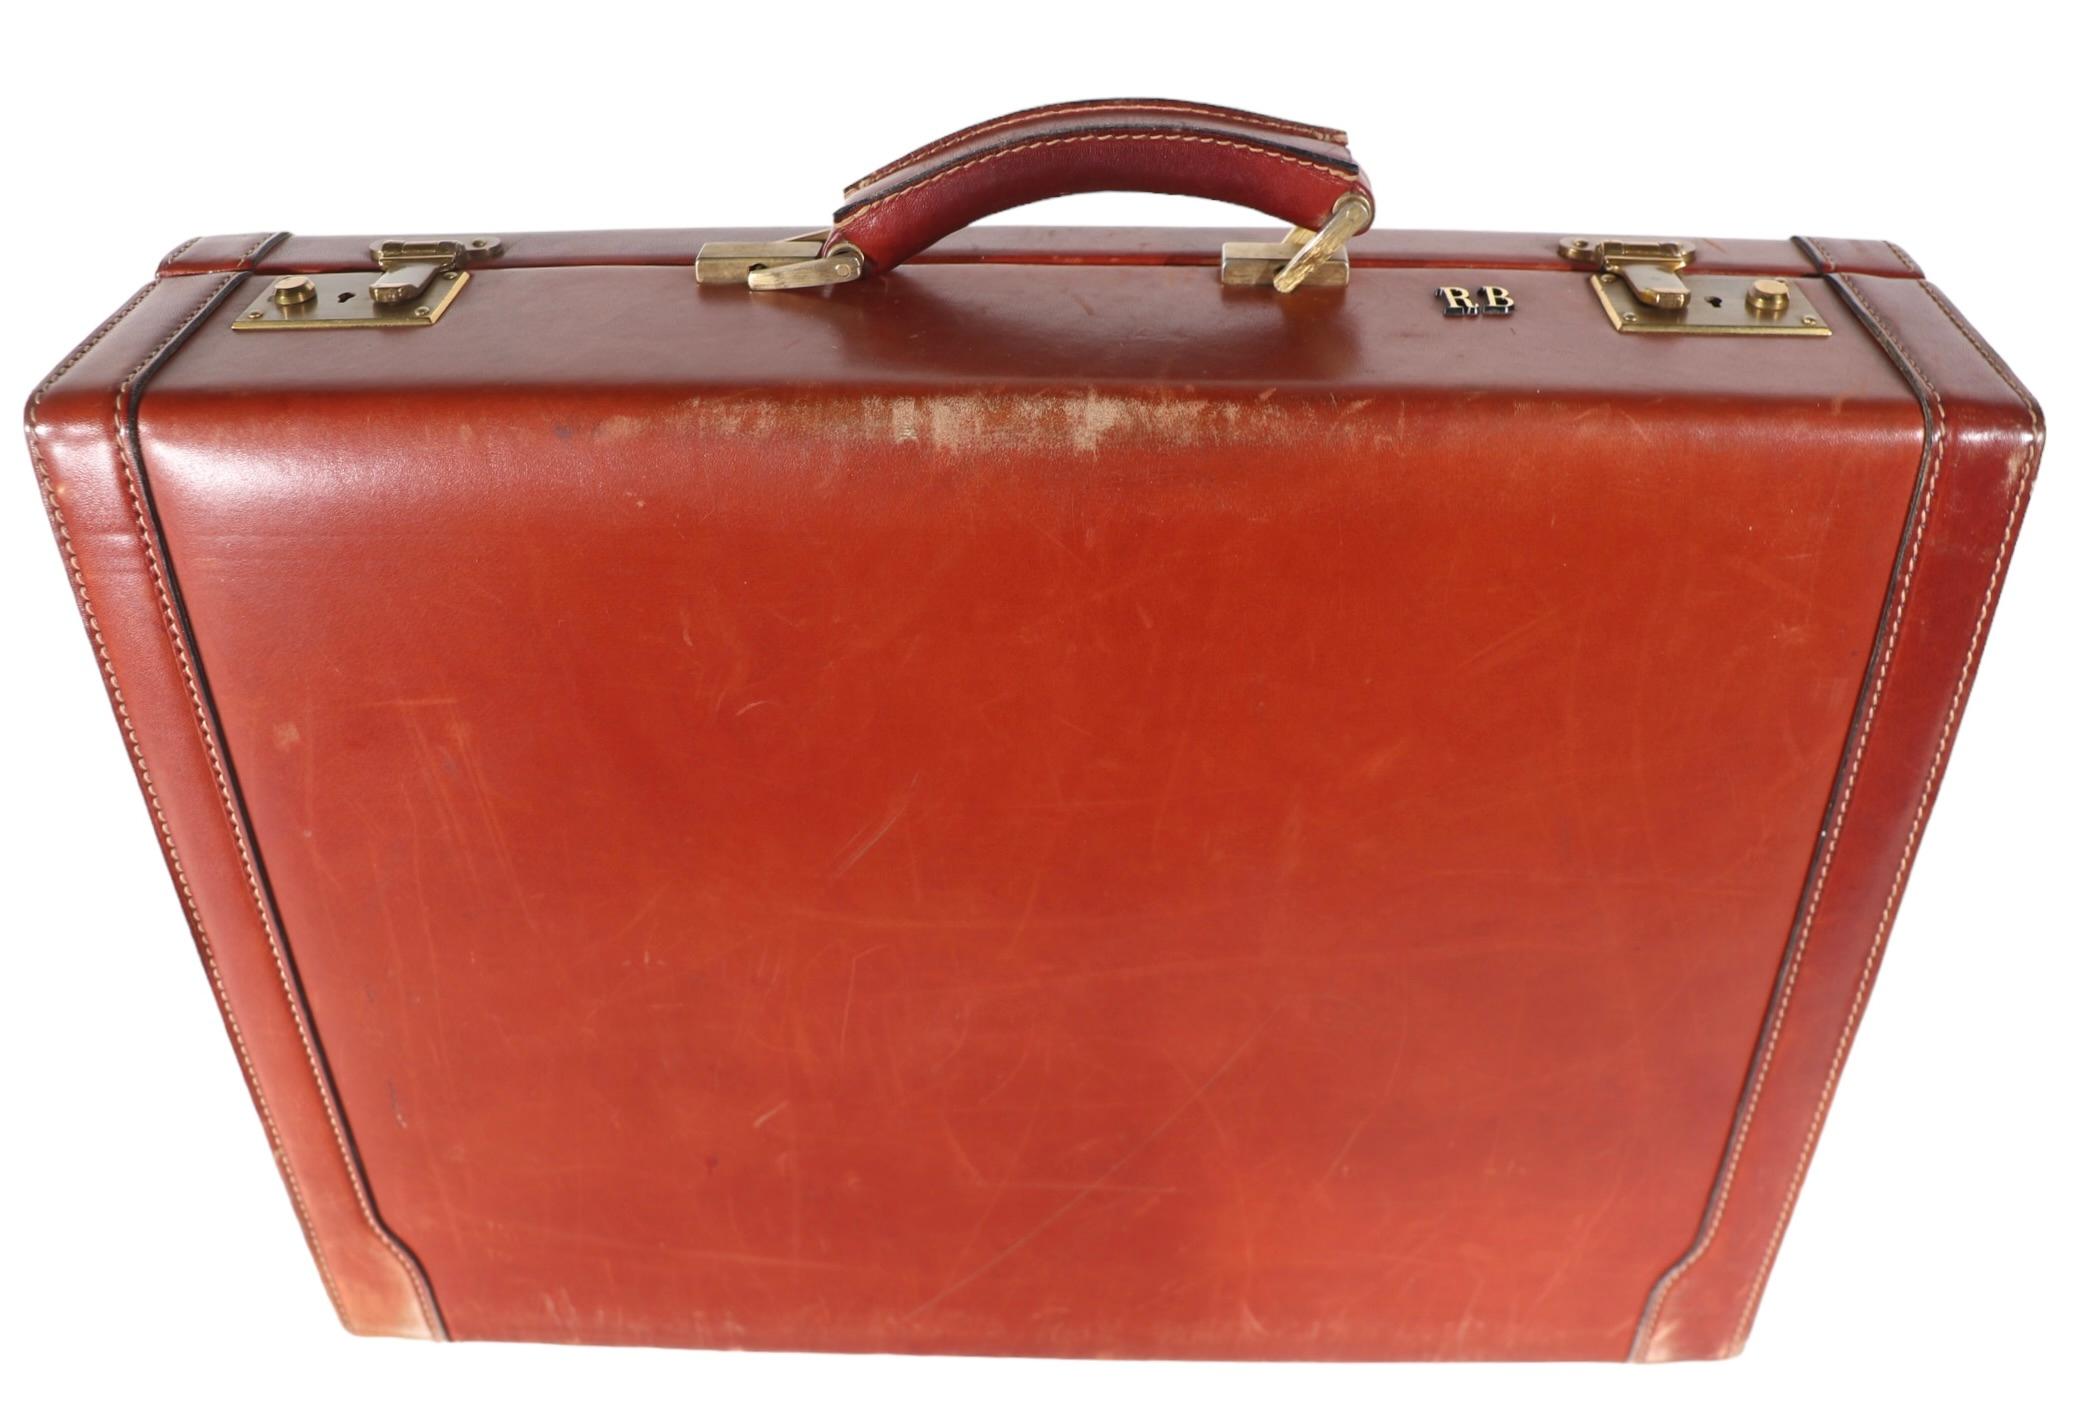  Mid Century Art Deco Hard Case Leather Attache Briefcase  after Bally, Hermes  For Sale 5